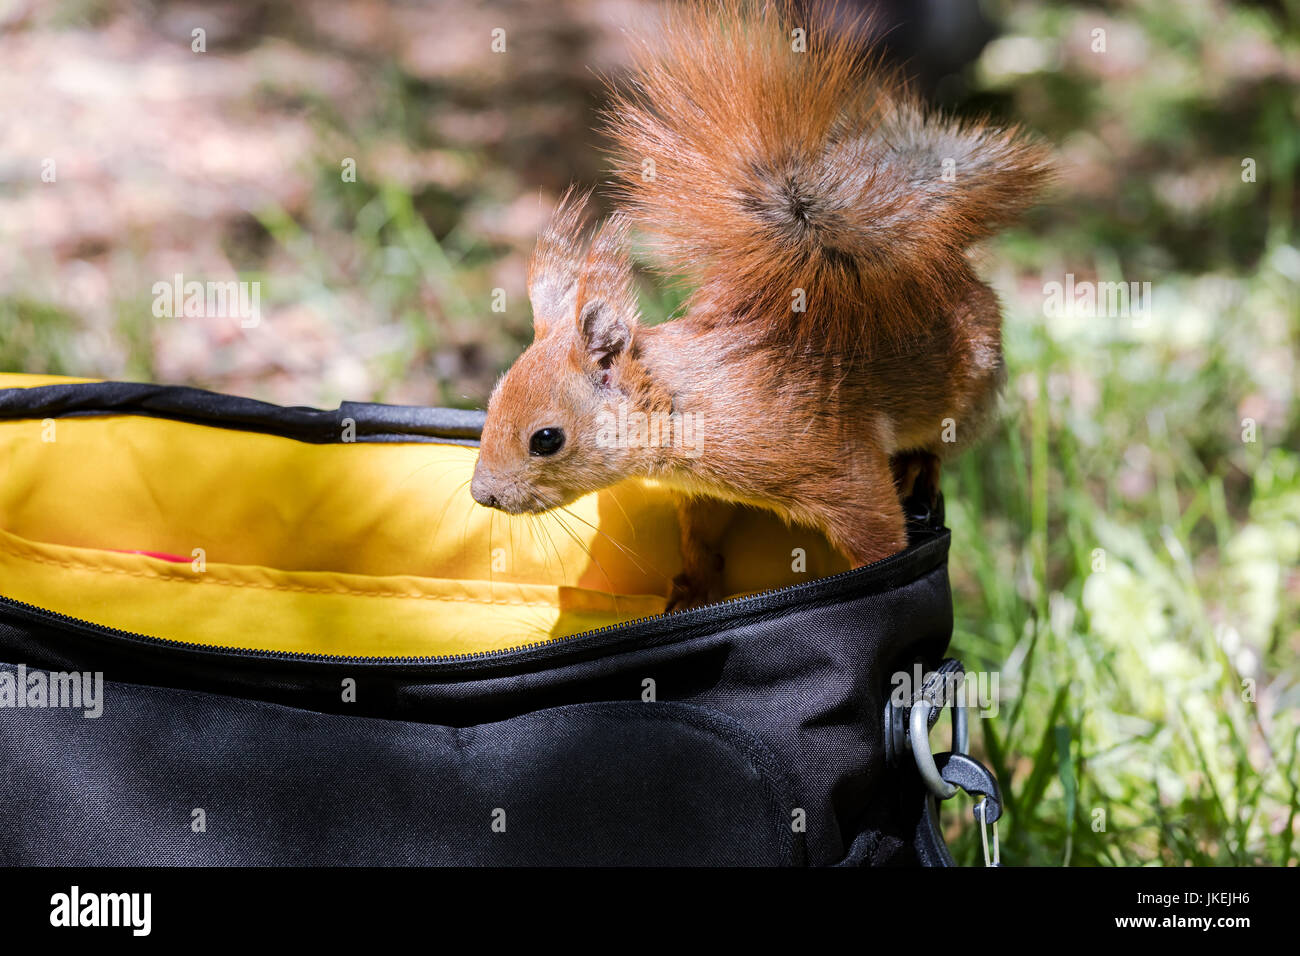 wild squirrel searching for food into bag in public park Stock Photo - Alamy